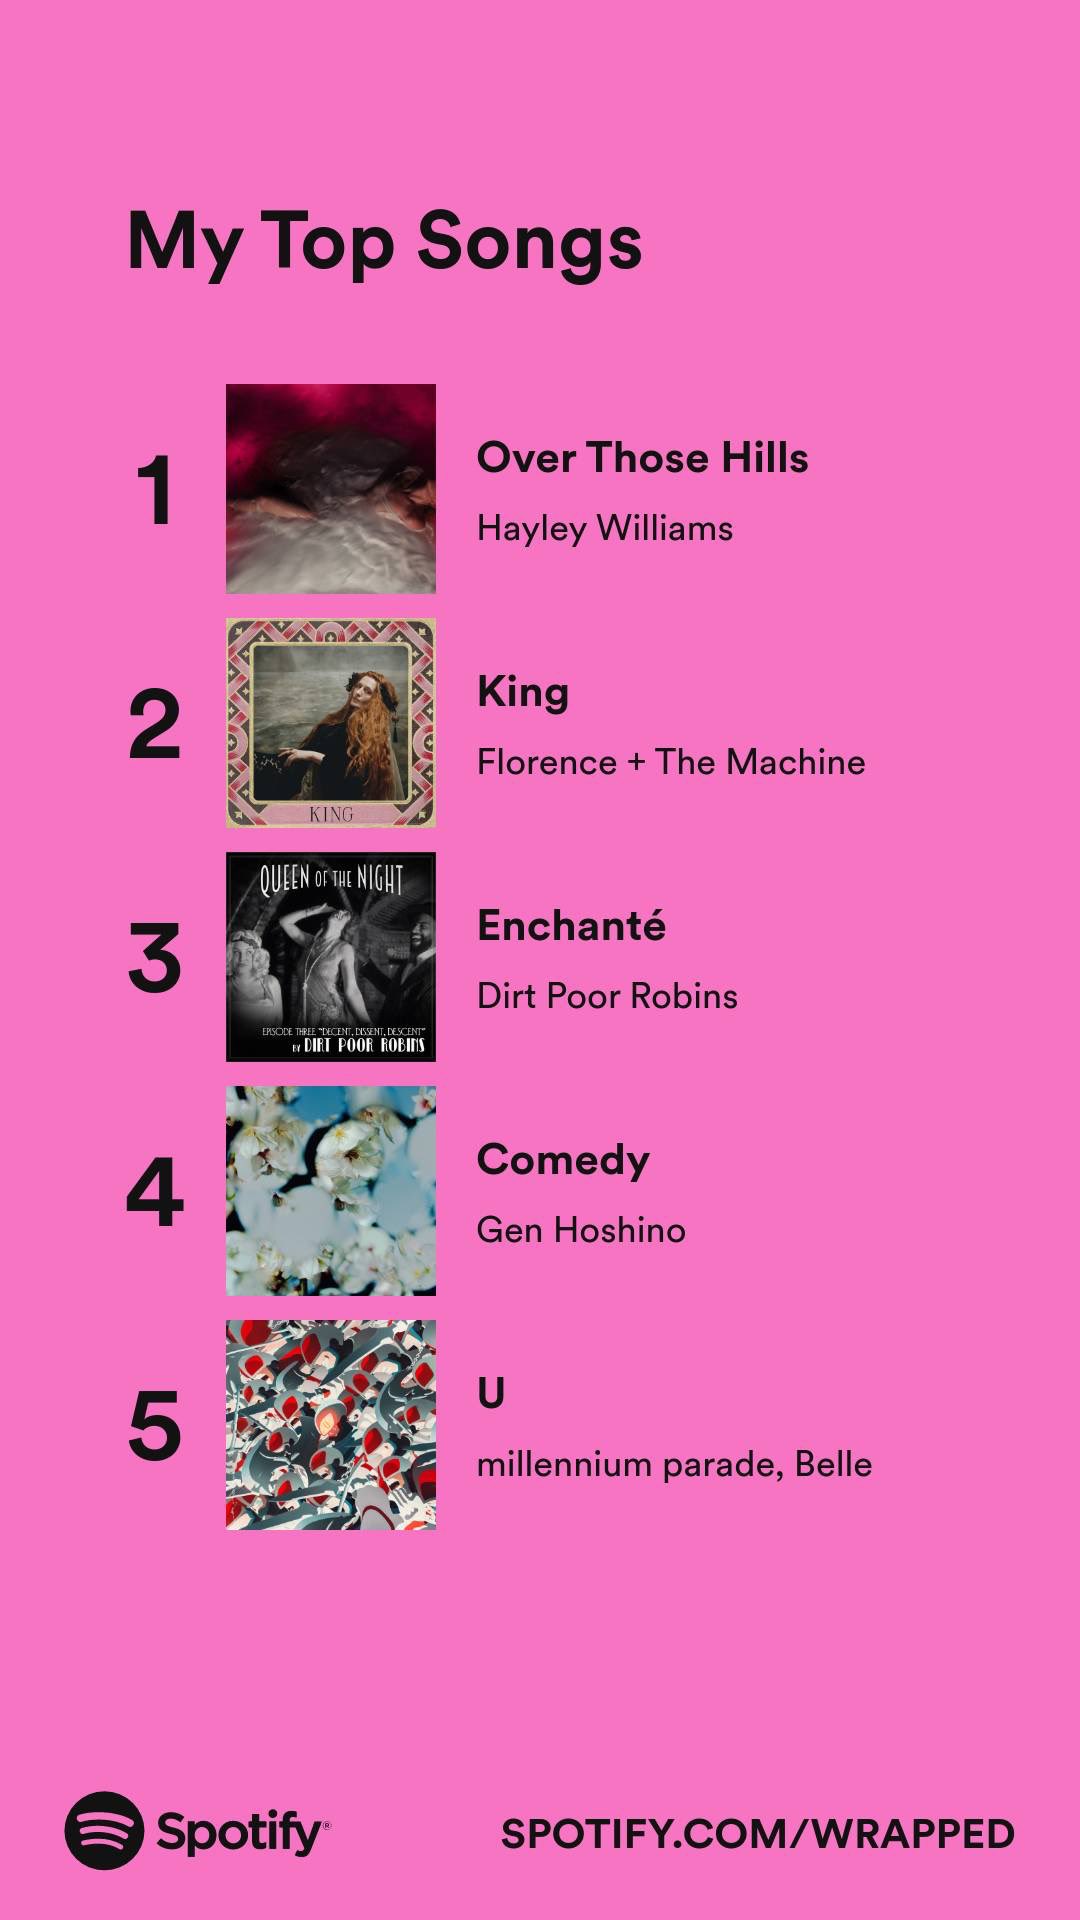 Top songs: Over Those Hills by Hayley Williams, King by Florence + The Machine, Enchanté by Dirt Poor Robins, Comedy by Gen Hoshino, and U by millennium parade and Belle.